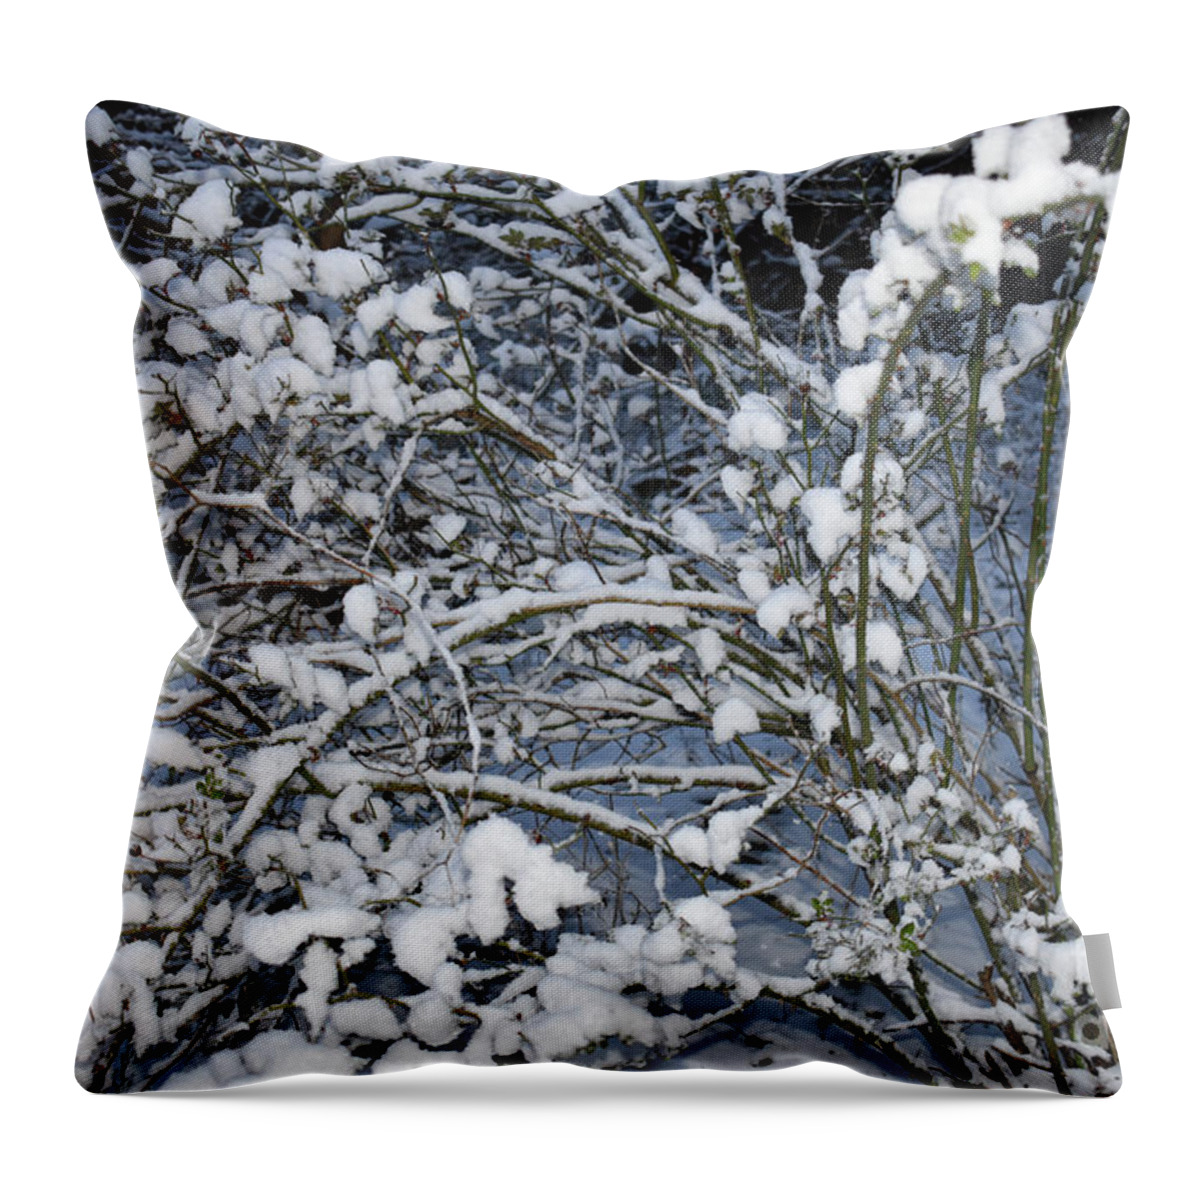 April Snow Throw Pillow featuring the photograph April Snow Curves by Anne Cameron Cutri